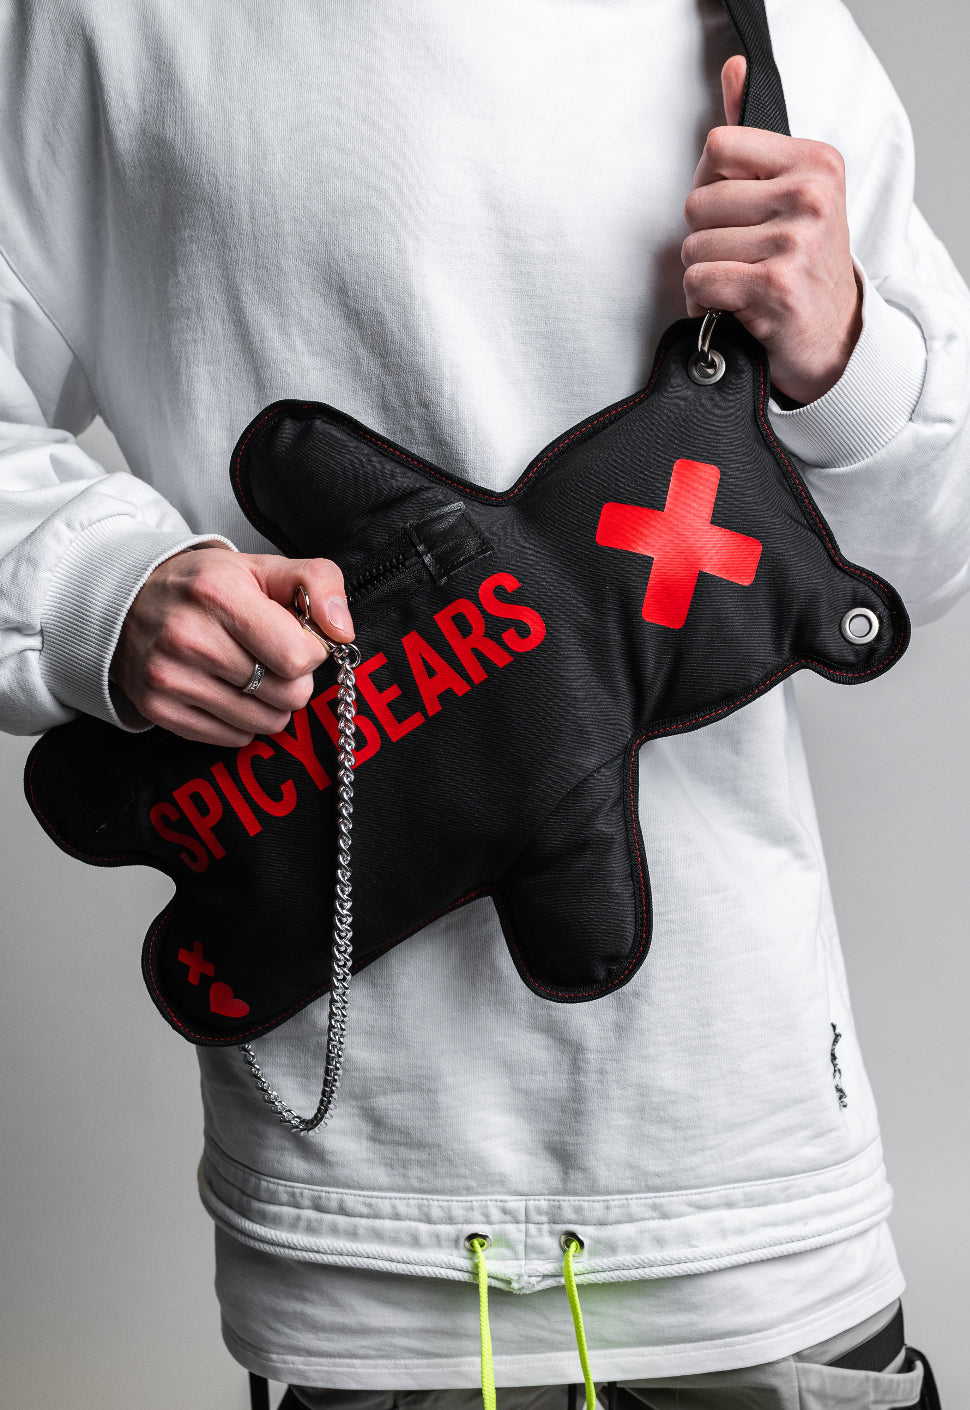 Upgrade Your Style with the Black SPICYBEARS Bag with Red Print - Removable and Adjustable Strap And Detachable Chain